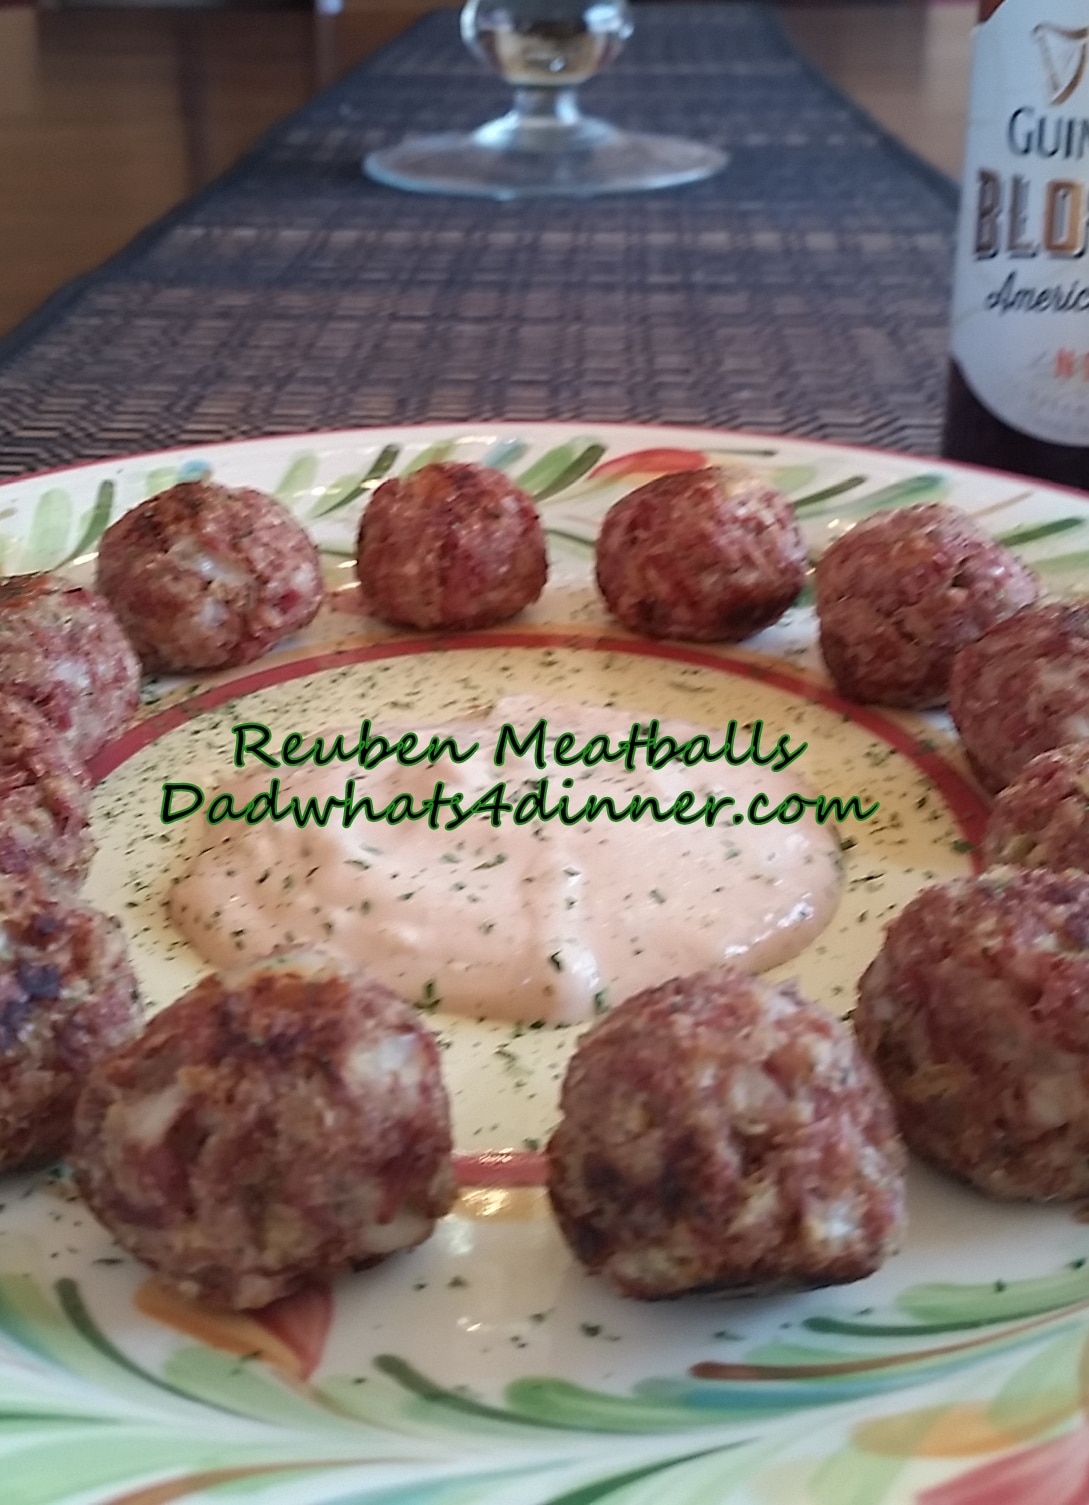 Get your green on for St. Patrick's Day with these Reuben Meatballs!